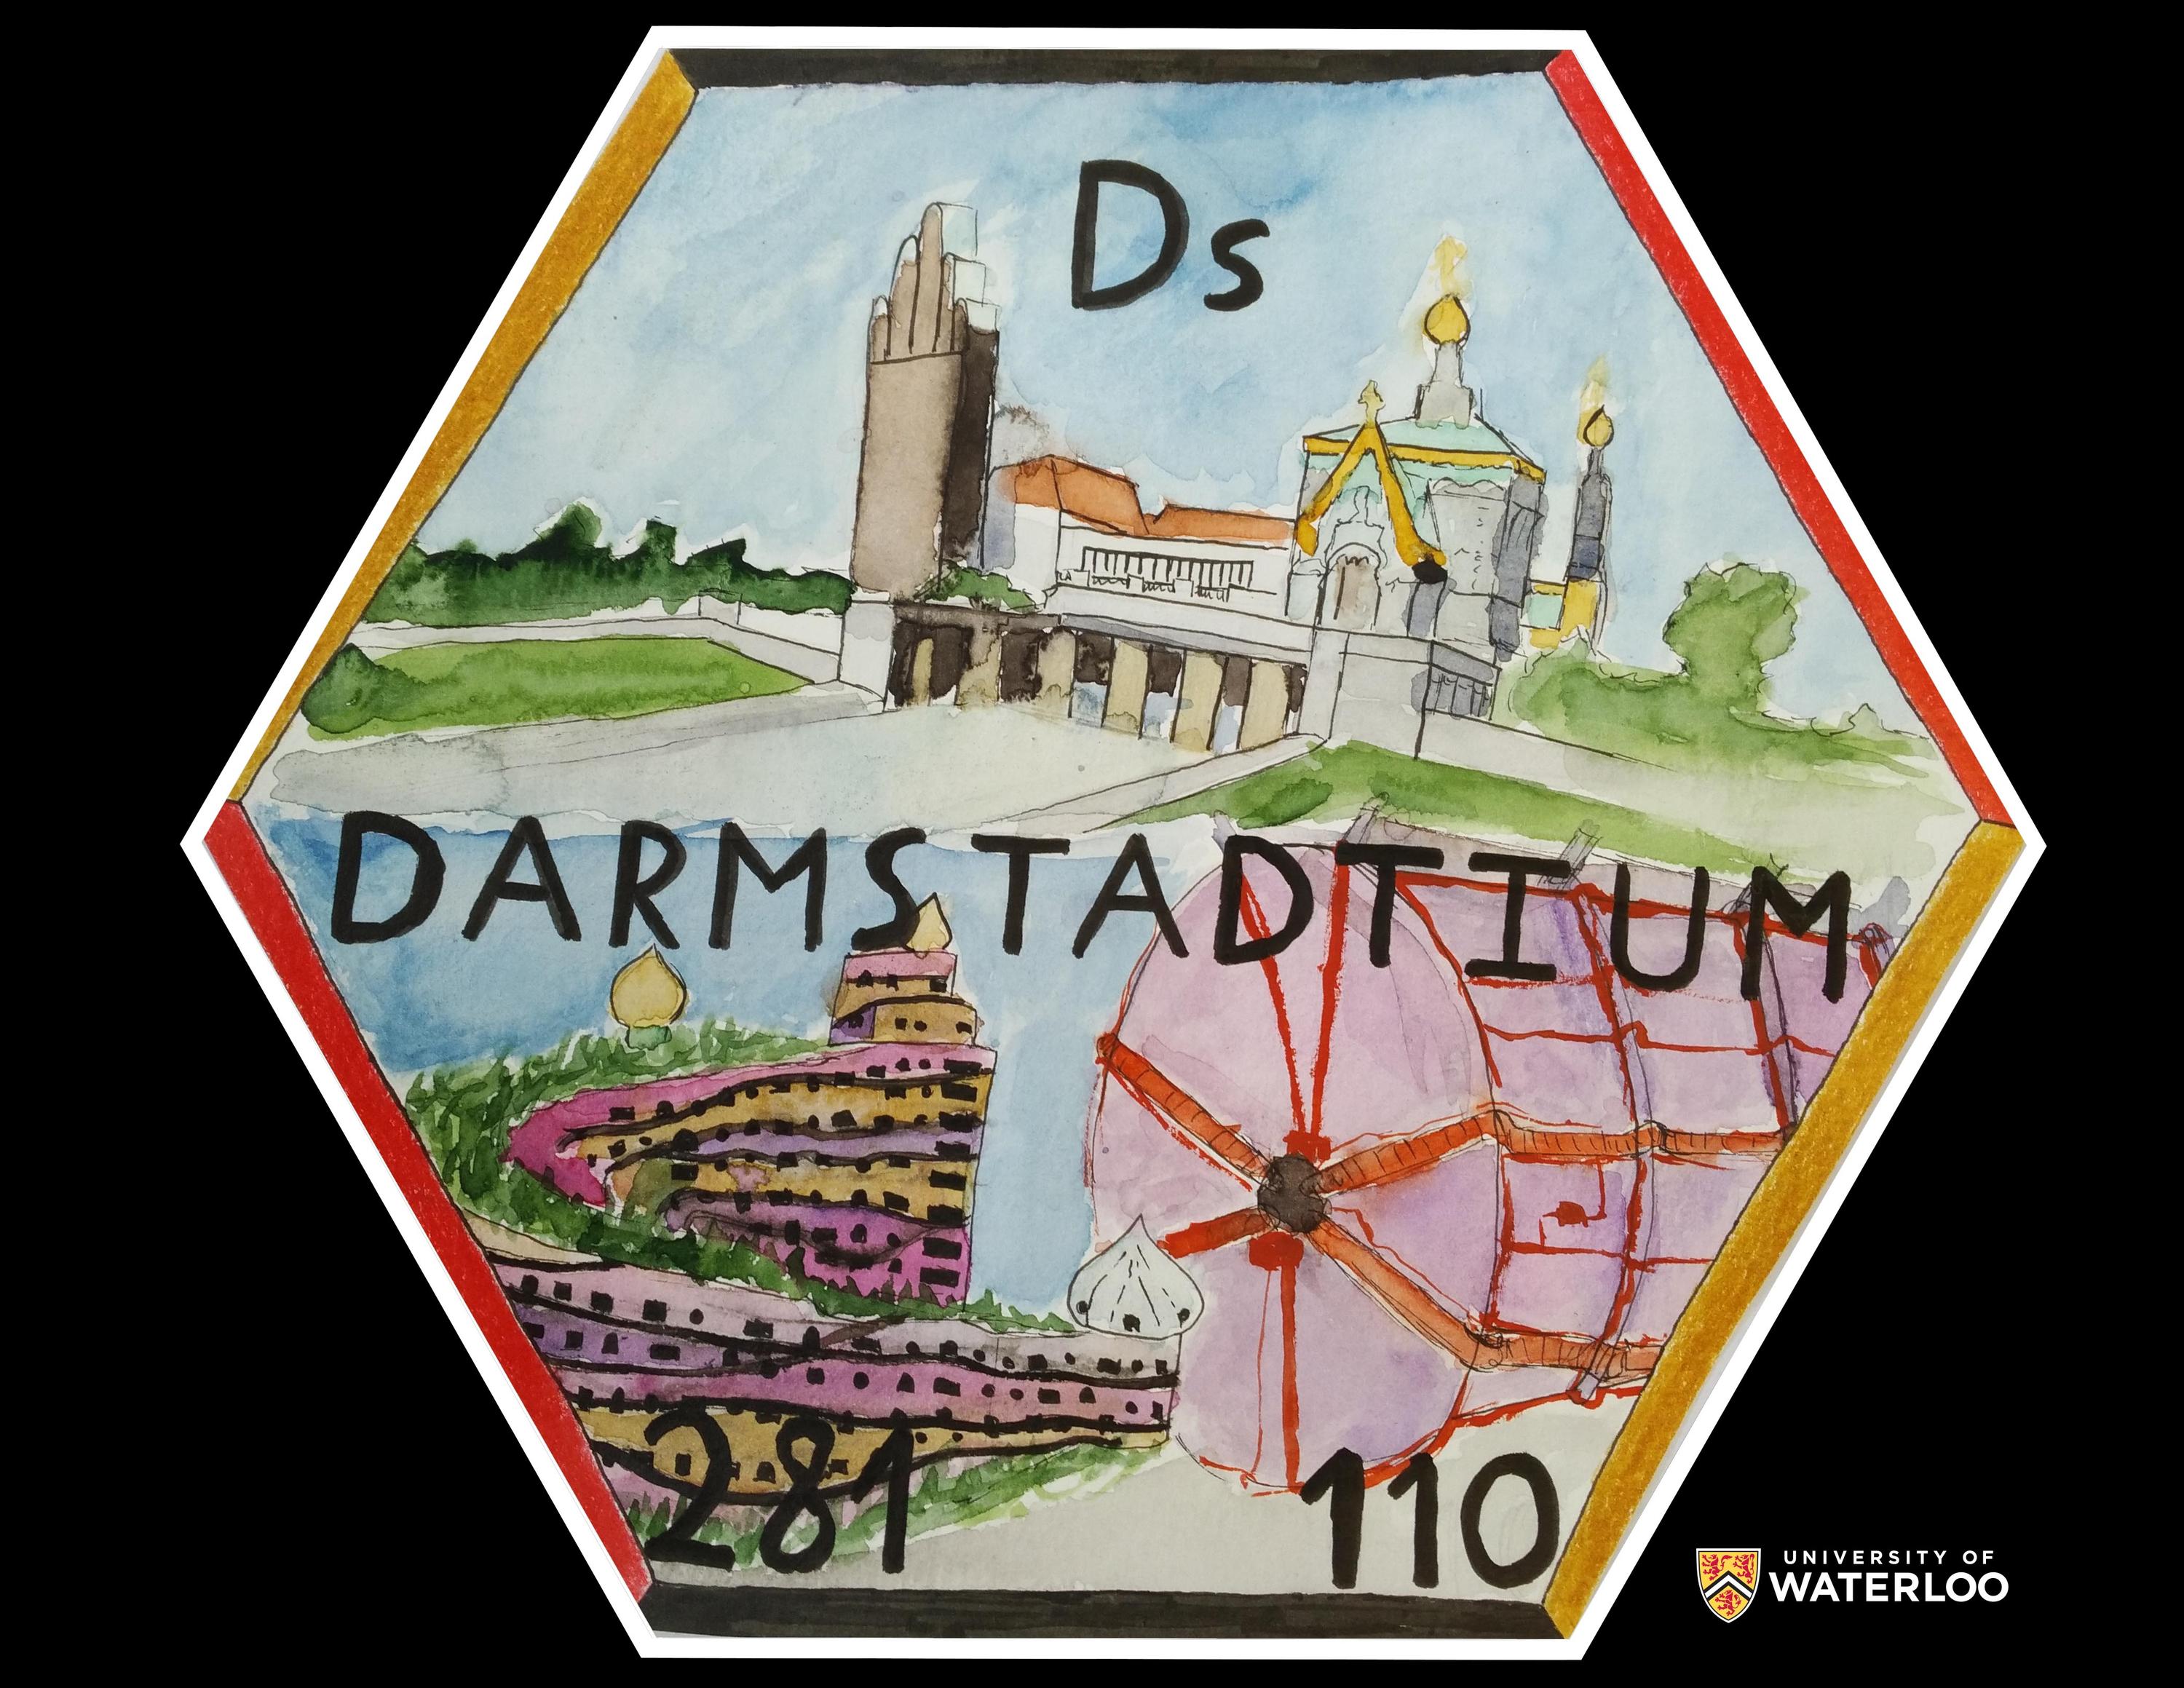 Pen and watercolour. Centre is word “Darmstadtium”, above the chemical symbol “Ds”, at the bottom, “281” and “110”. Background features a cityscape of Mathildenhöhe and the ‘Waldspirale’ building complex in Darmstadt, along with and a particle accelerator in the lower right corner.